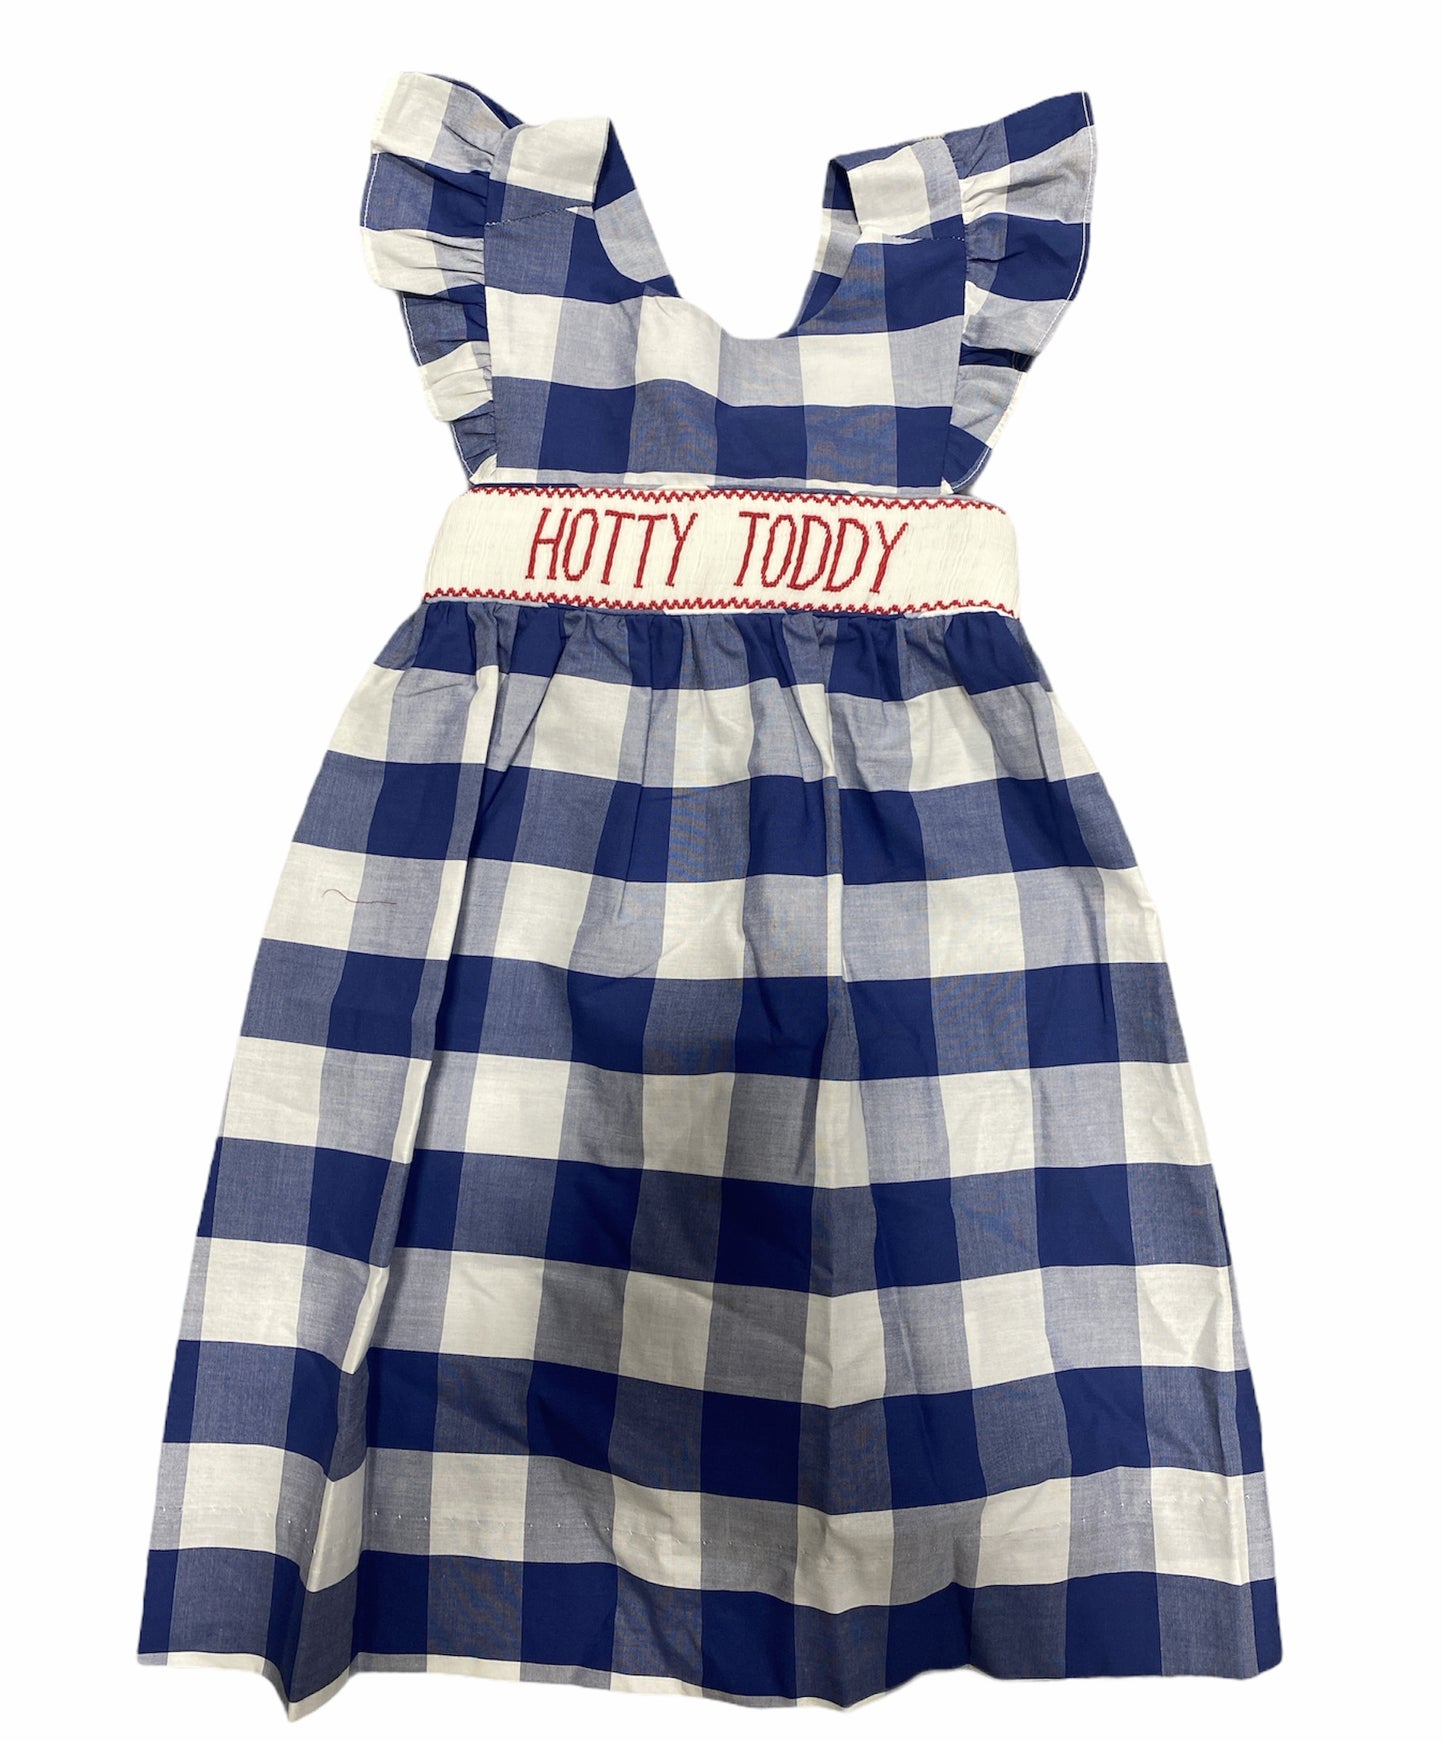 Smocked Hotty Toddy Dress